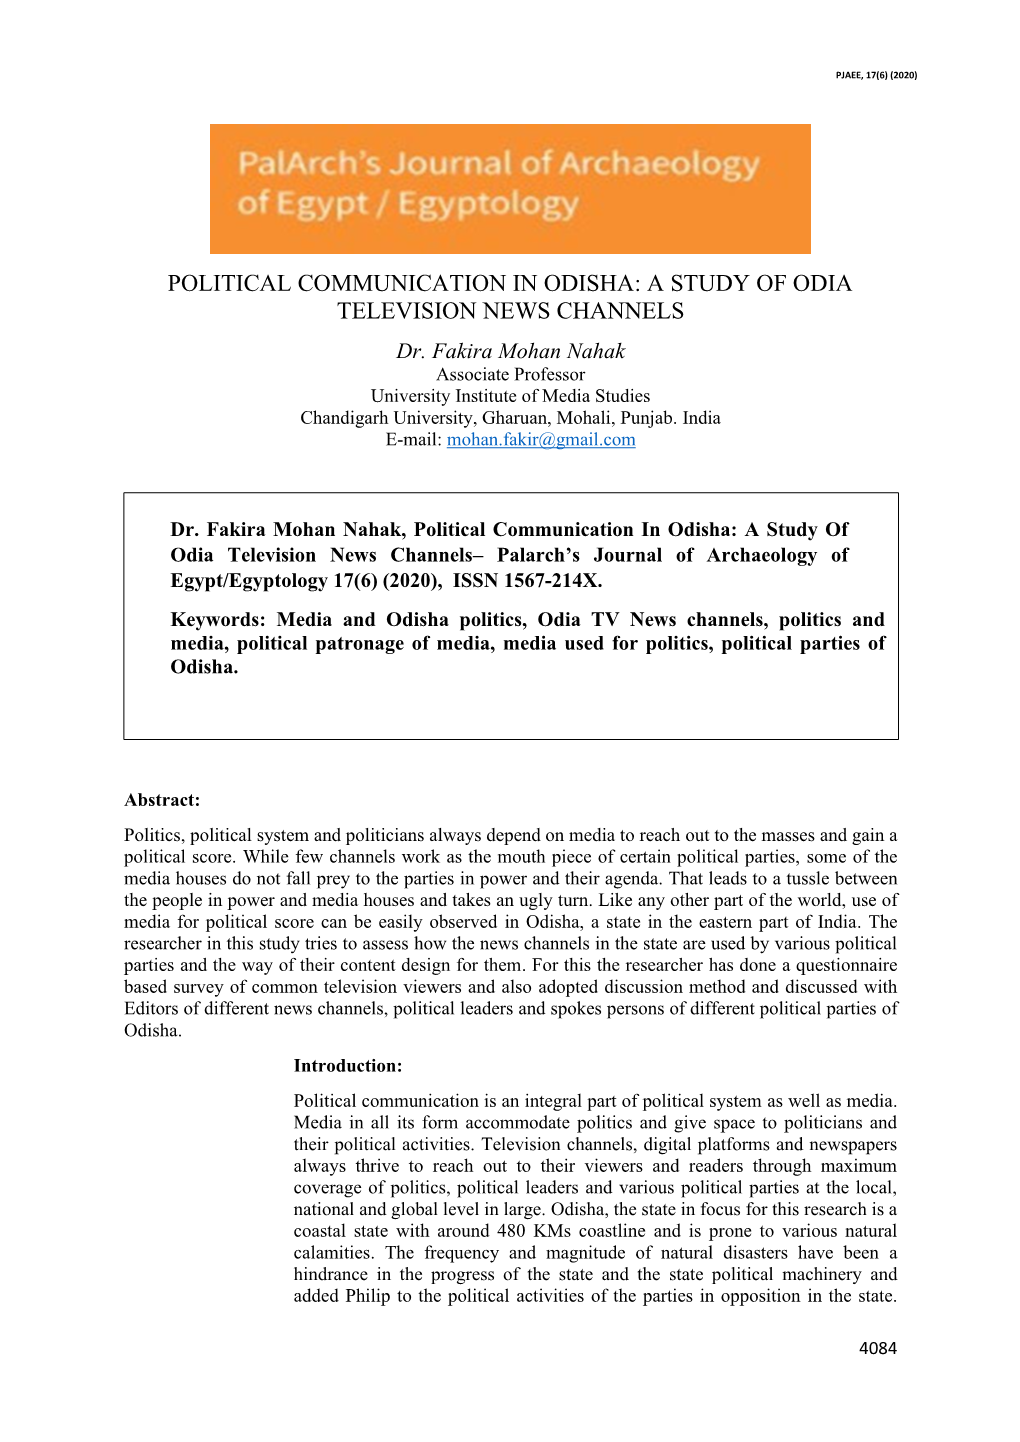 POLITICAL COMMUNICATION in ODISHA: a STUDY of ODIA TELEVISION NEWS CHANNELS Dr